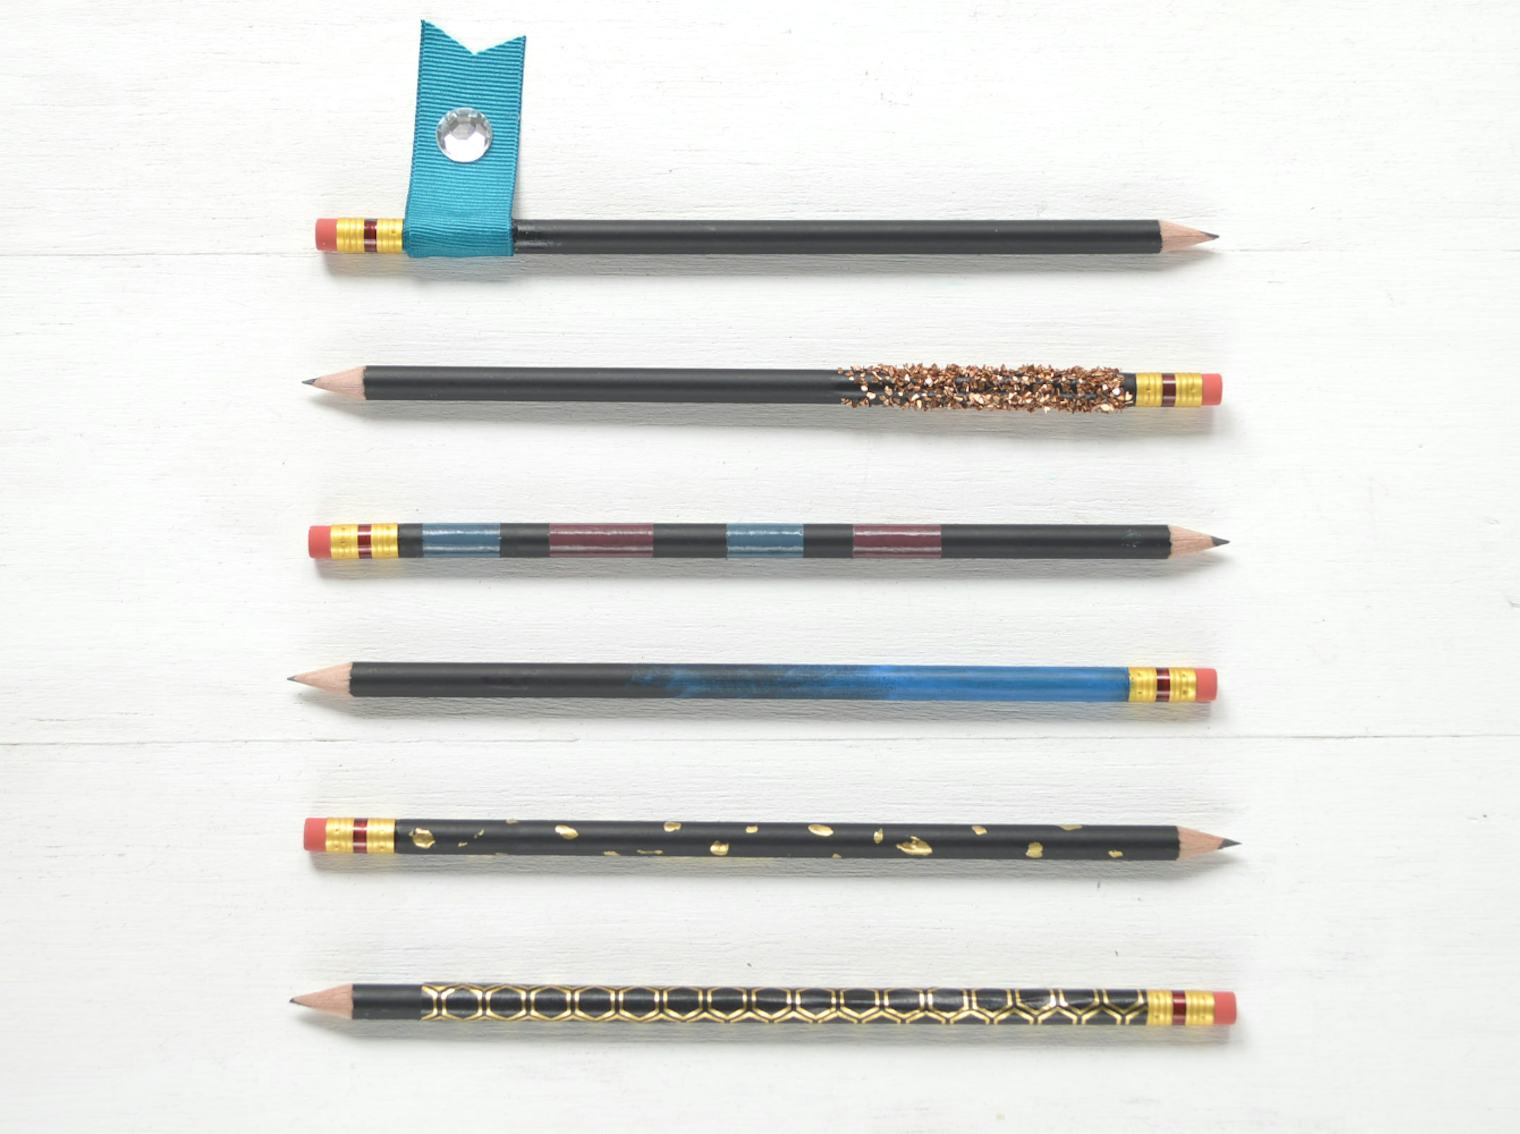 6 Pencil DIY Projects To Upgrade Your School Supplies Game Just In Time ...